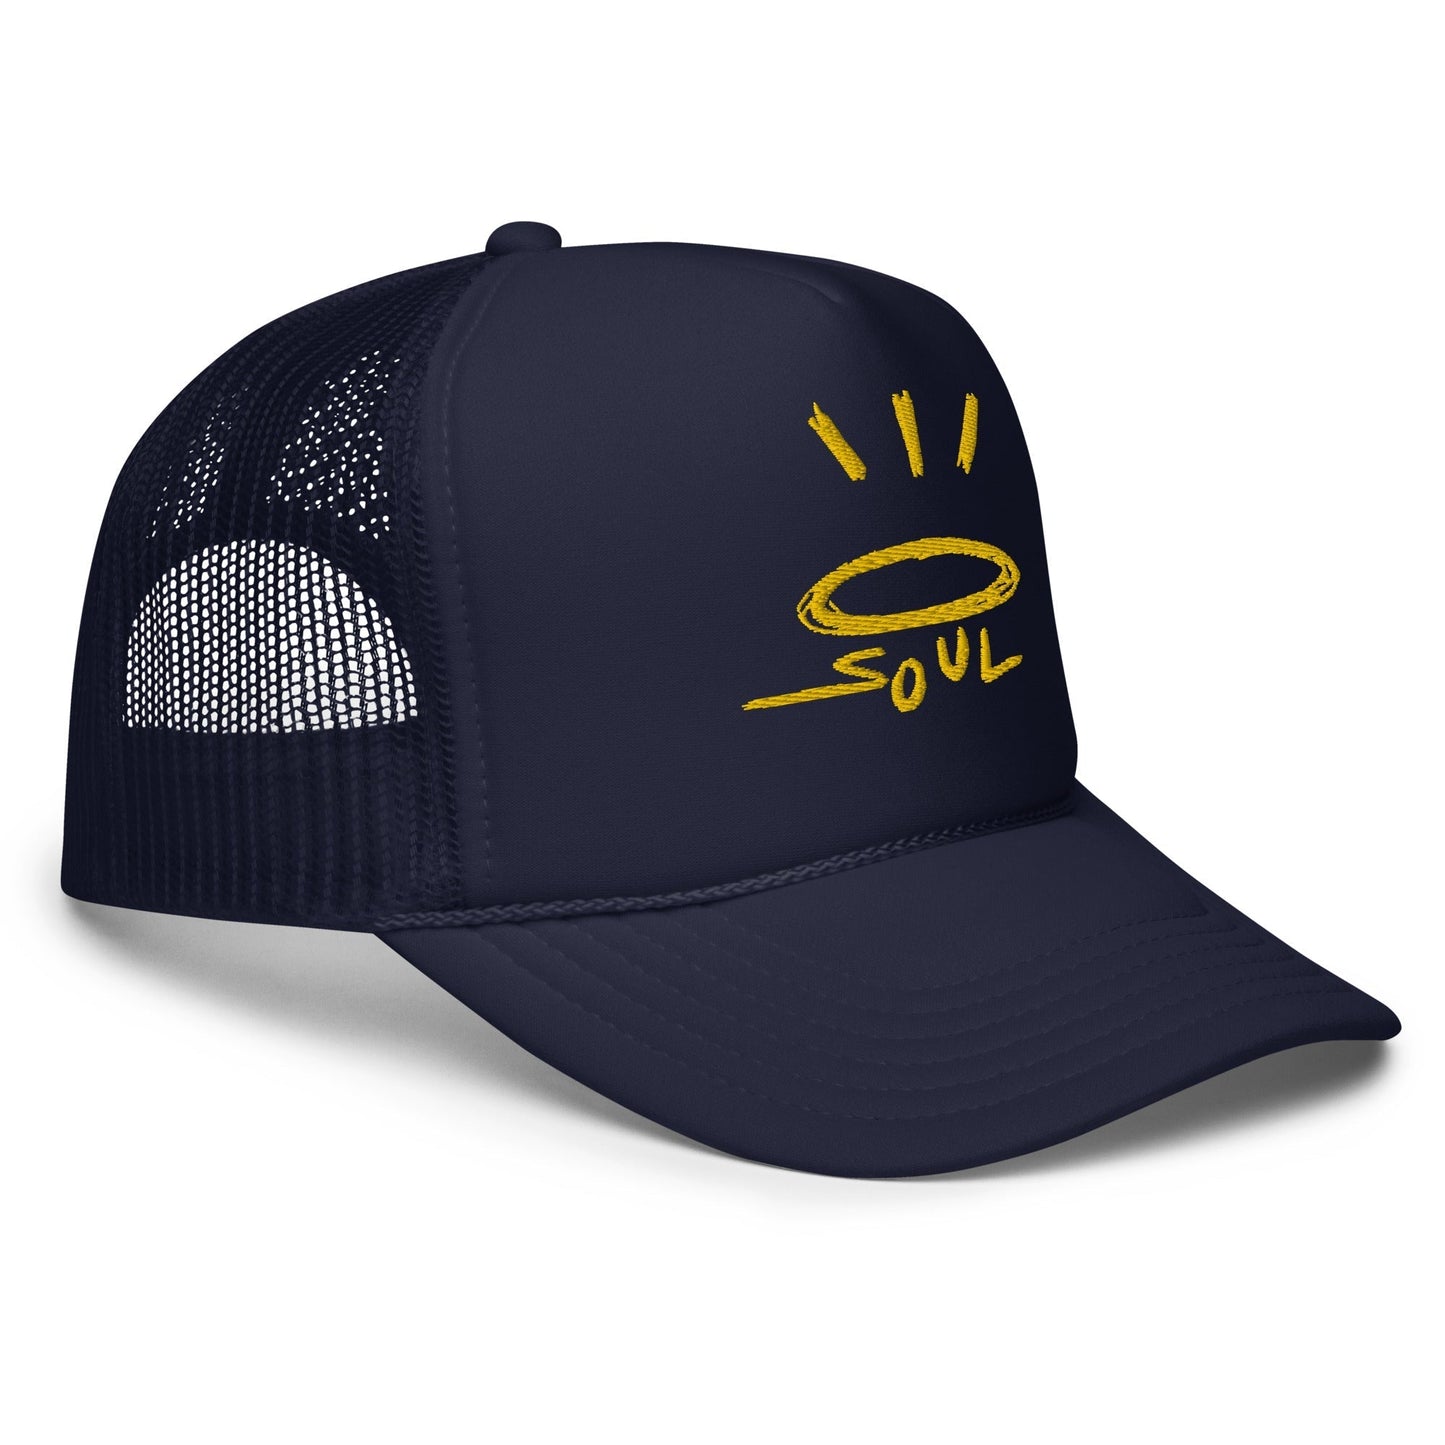 HALO "Samsara" NAVY BLUEBERRY Embroidered 3-D Puff Trucker Hat x De La Soul Childs' Infamous Logo and Signature *FREE SHIPPING ON ME, LIMITED TIME*